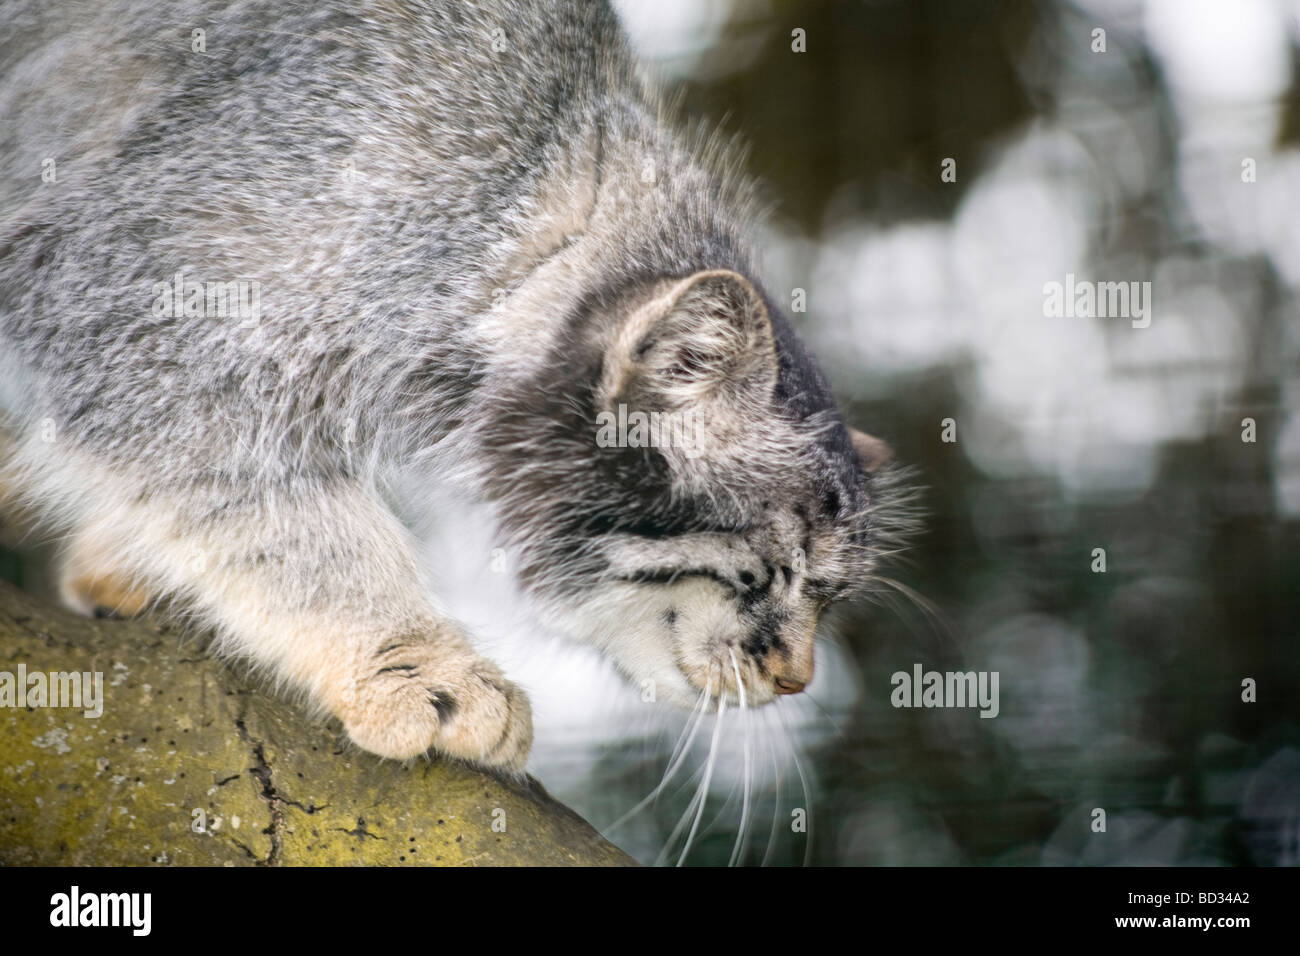 Khan a male Pallas Cat (Octolobus Manul) from Central Asia, Wildlife Heritage Foundation, UK Stock Photo